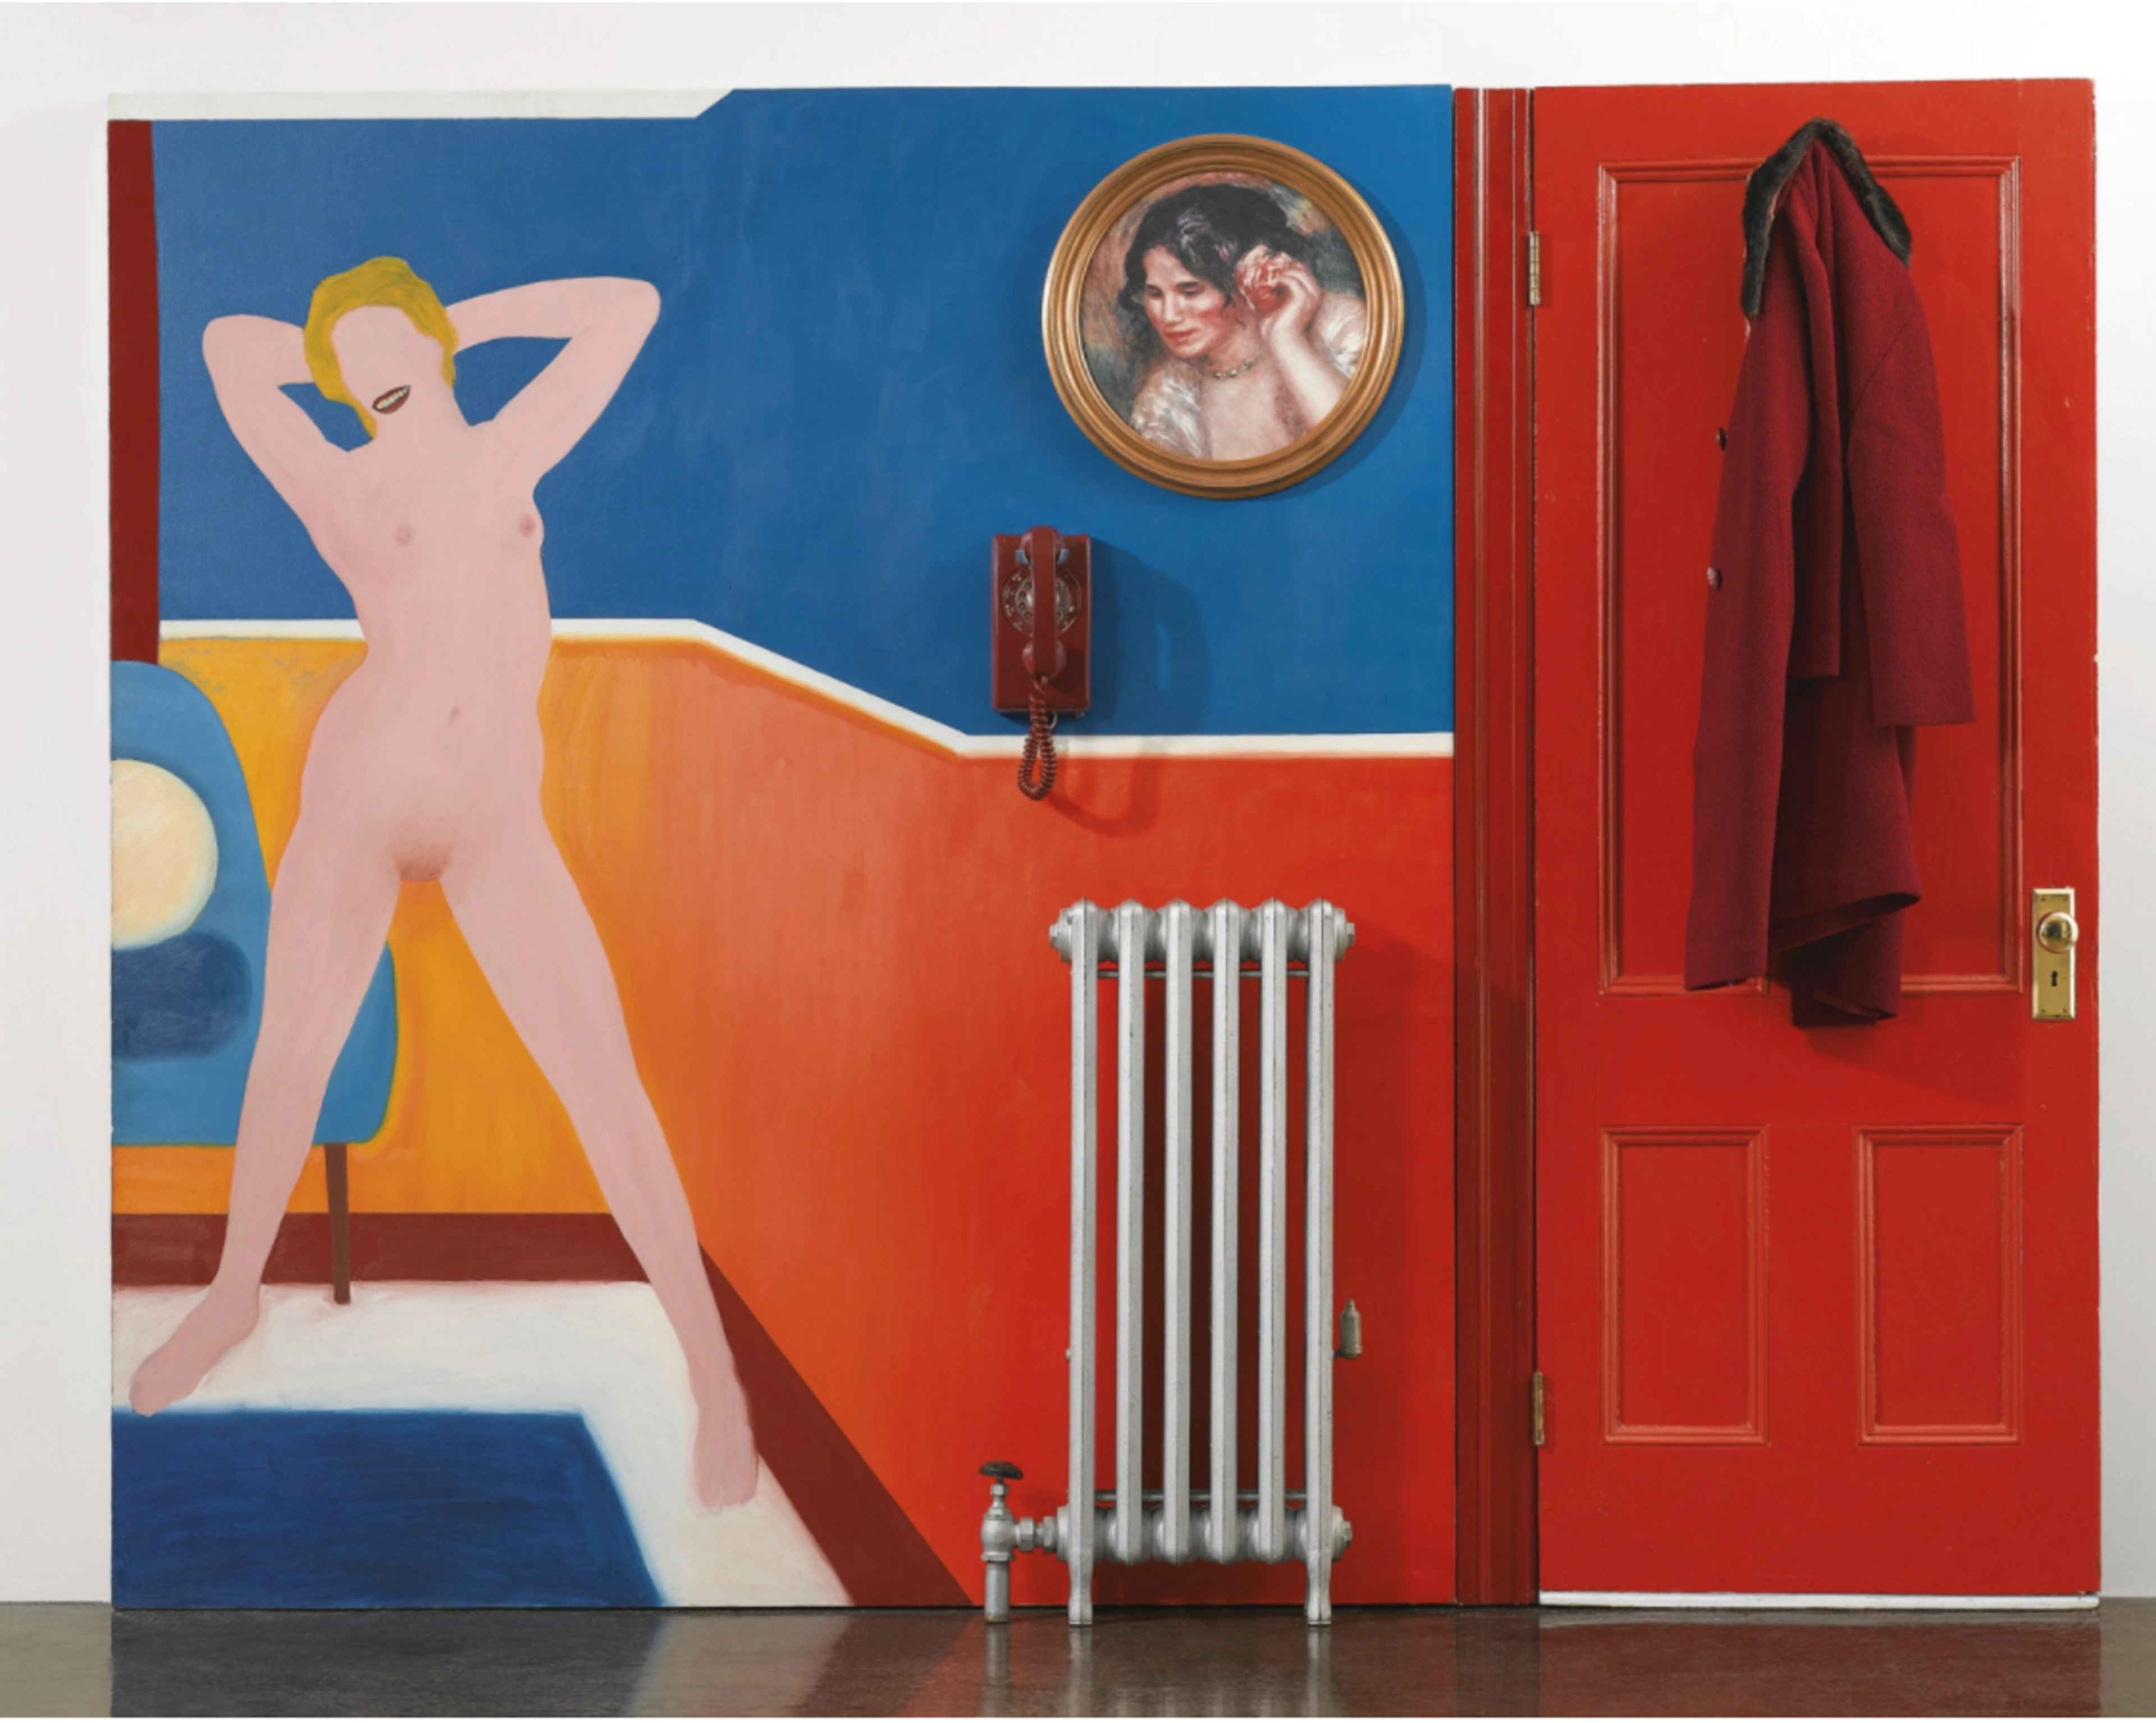 Great American Nude no. 44 by Tom Wesselmann